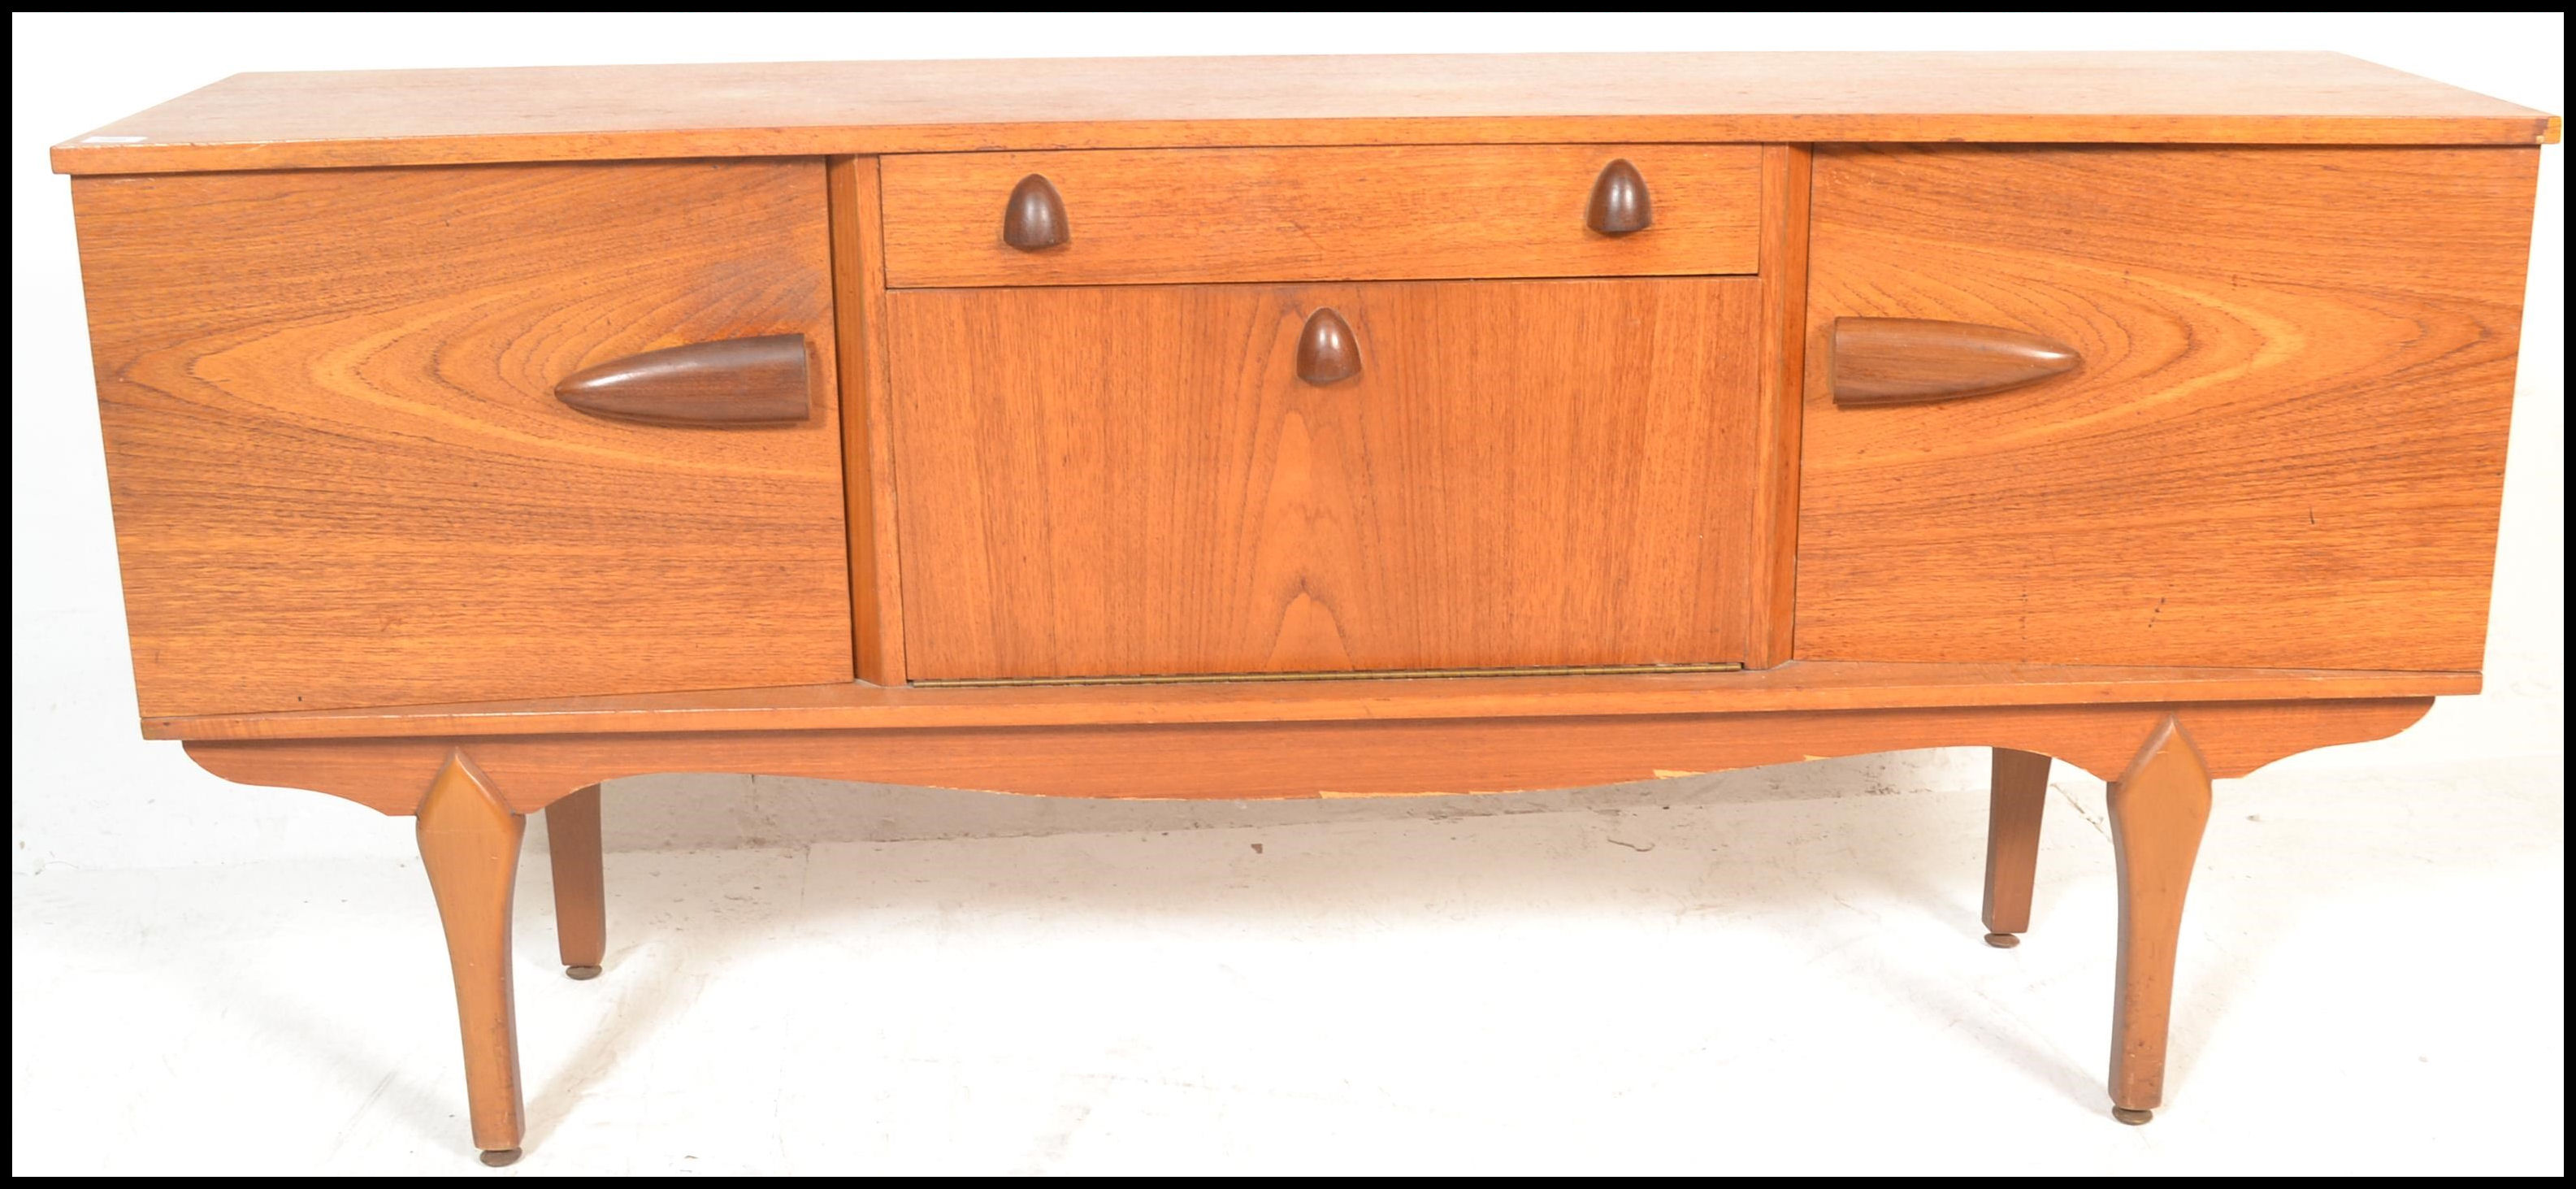 A vintage mid 20th century teak wood sideboard having a central drop down bar compartment with - Image 2 of 6